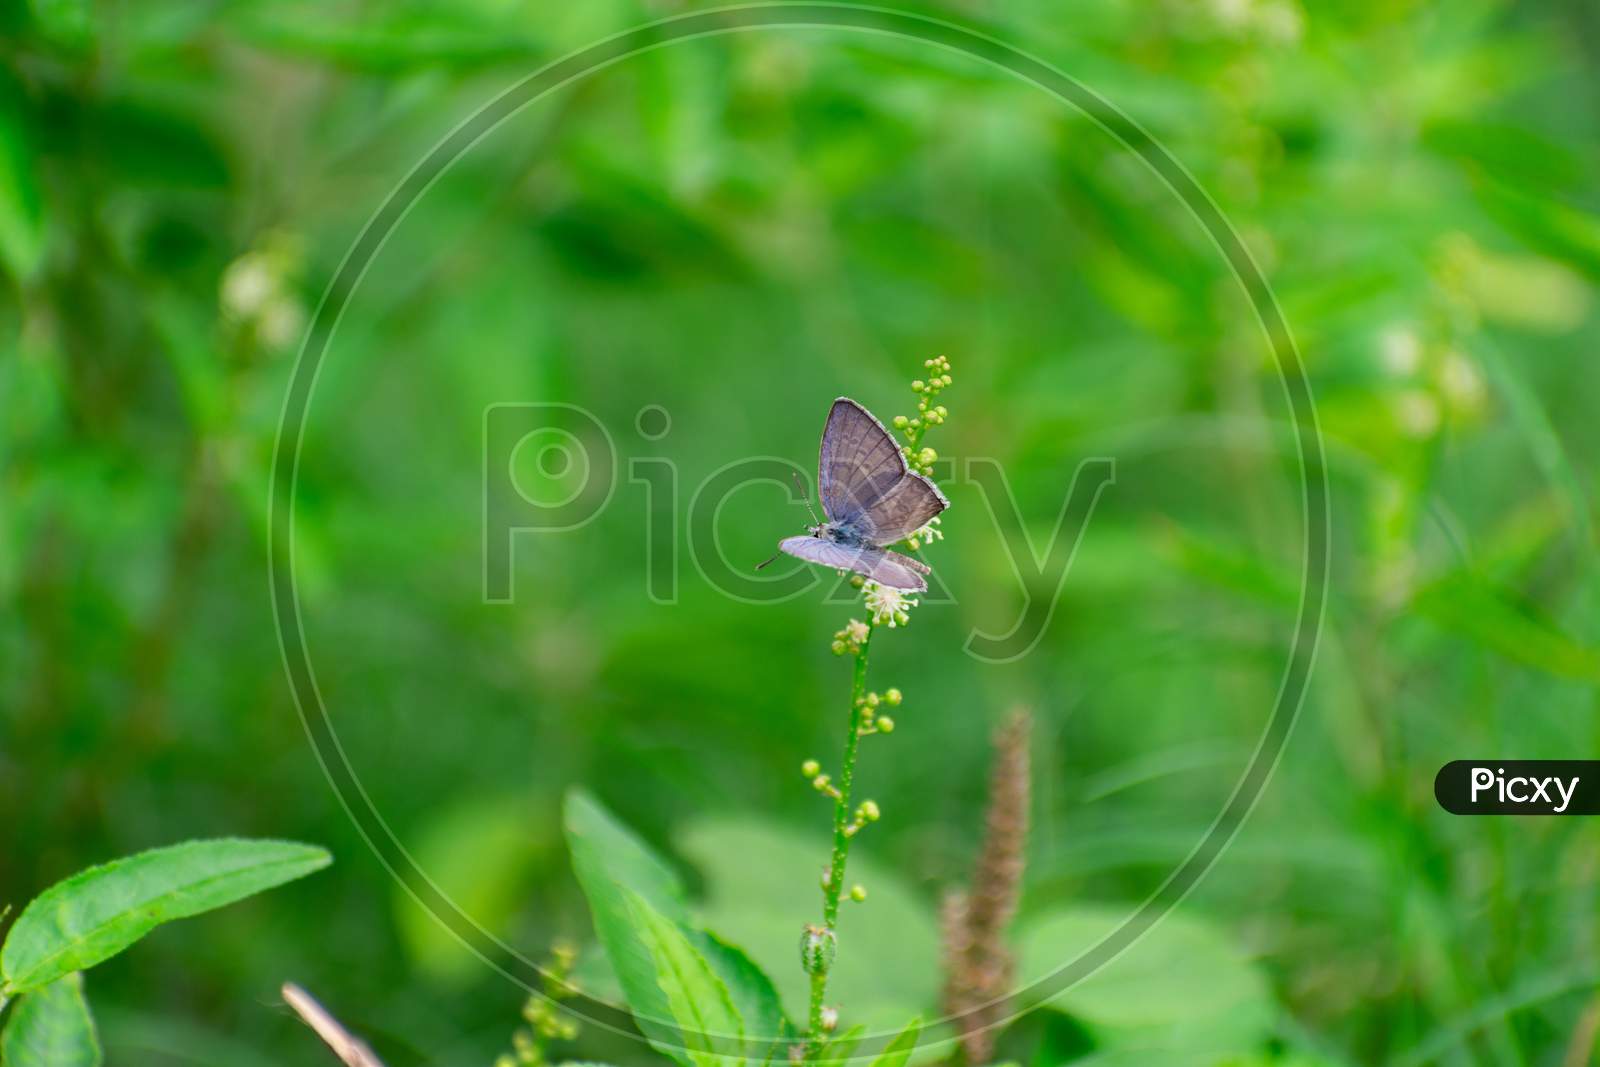 COMMON INDIAN BLUISH GREY TINY BUTTERFLY SITTING ON GRASS